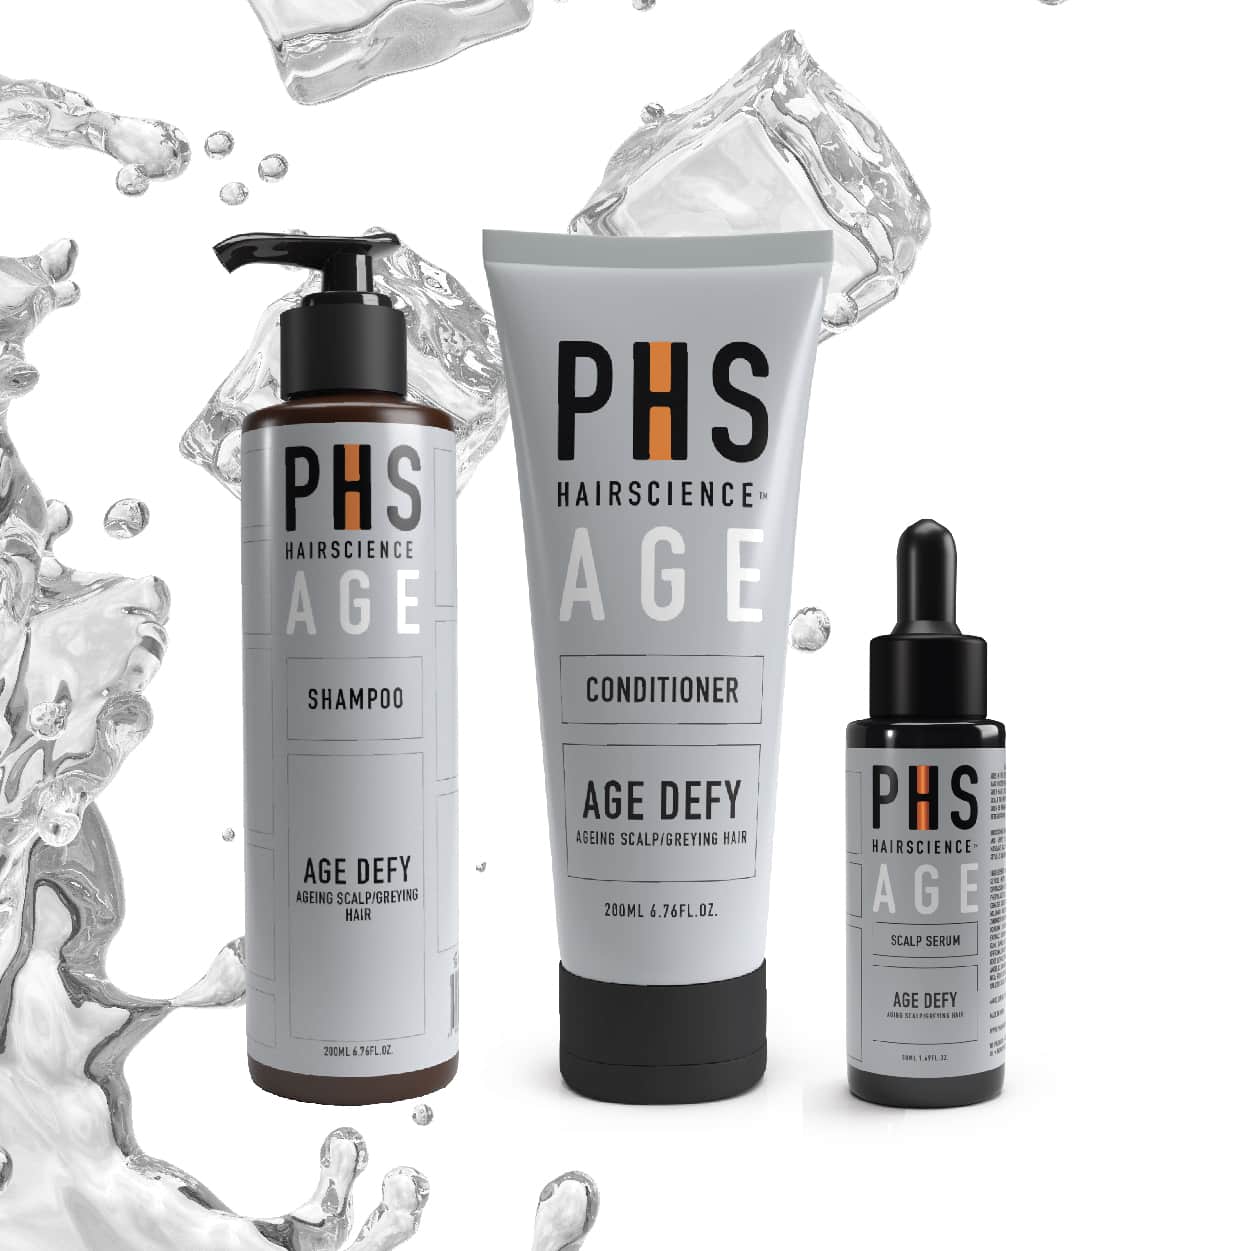 phs hairscience products for ageing scalp and greying hair